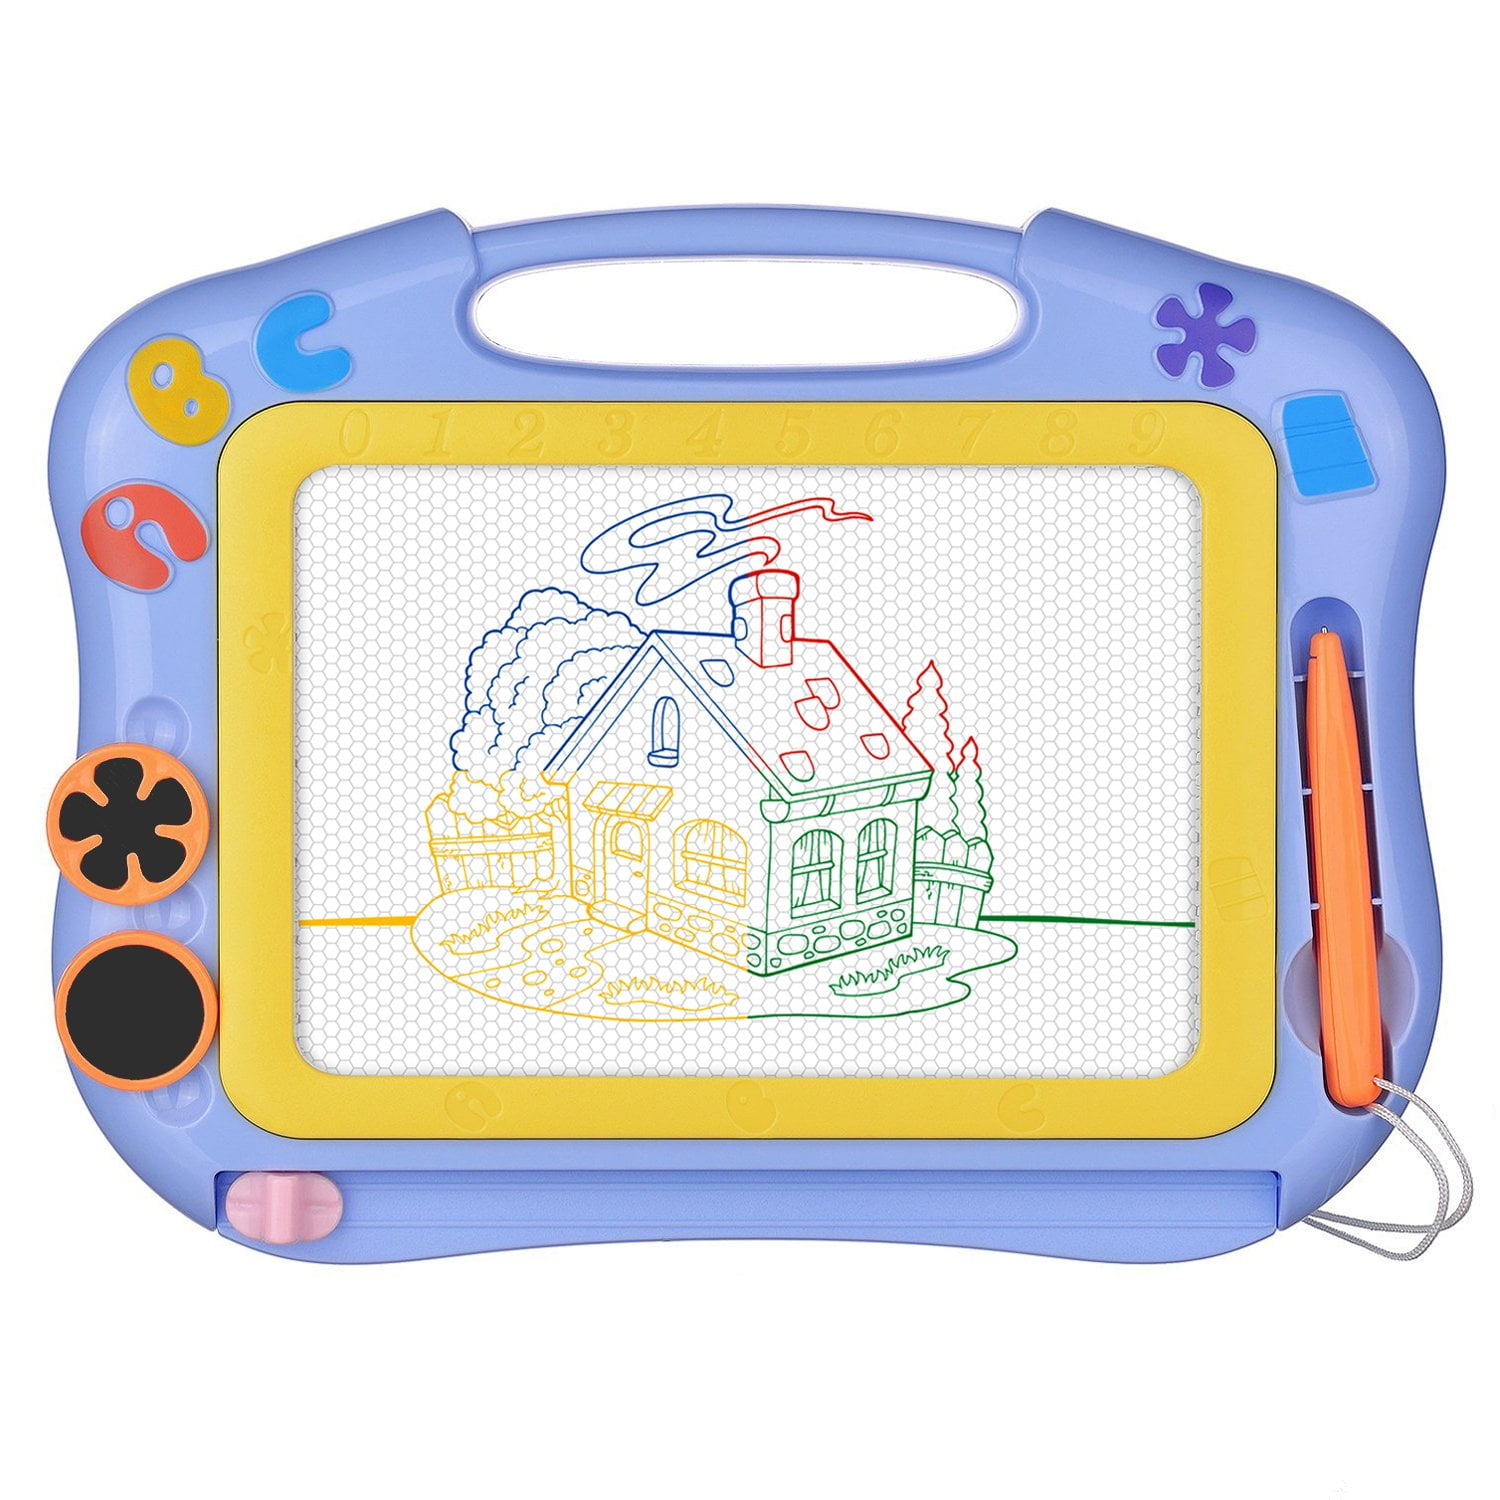 Odizli Magnetic Drawing Board Magna Scribble Doodle Sketch Pad Colorful Erasable Writing Painting Tablet Reusable Magic Draw Art Fun Education Developing Toy Gift with Stamps and Pen for Kids Blue